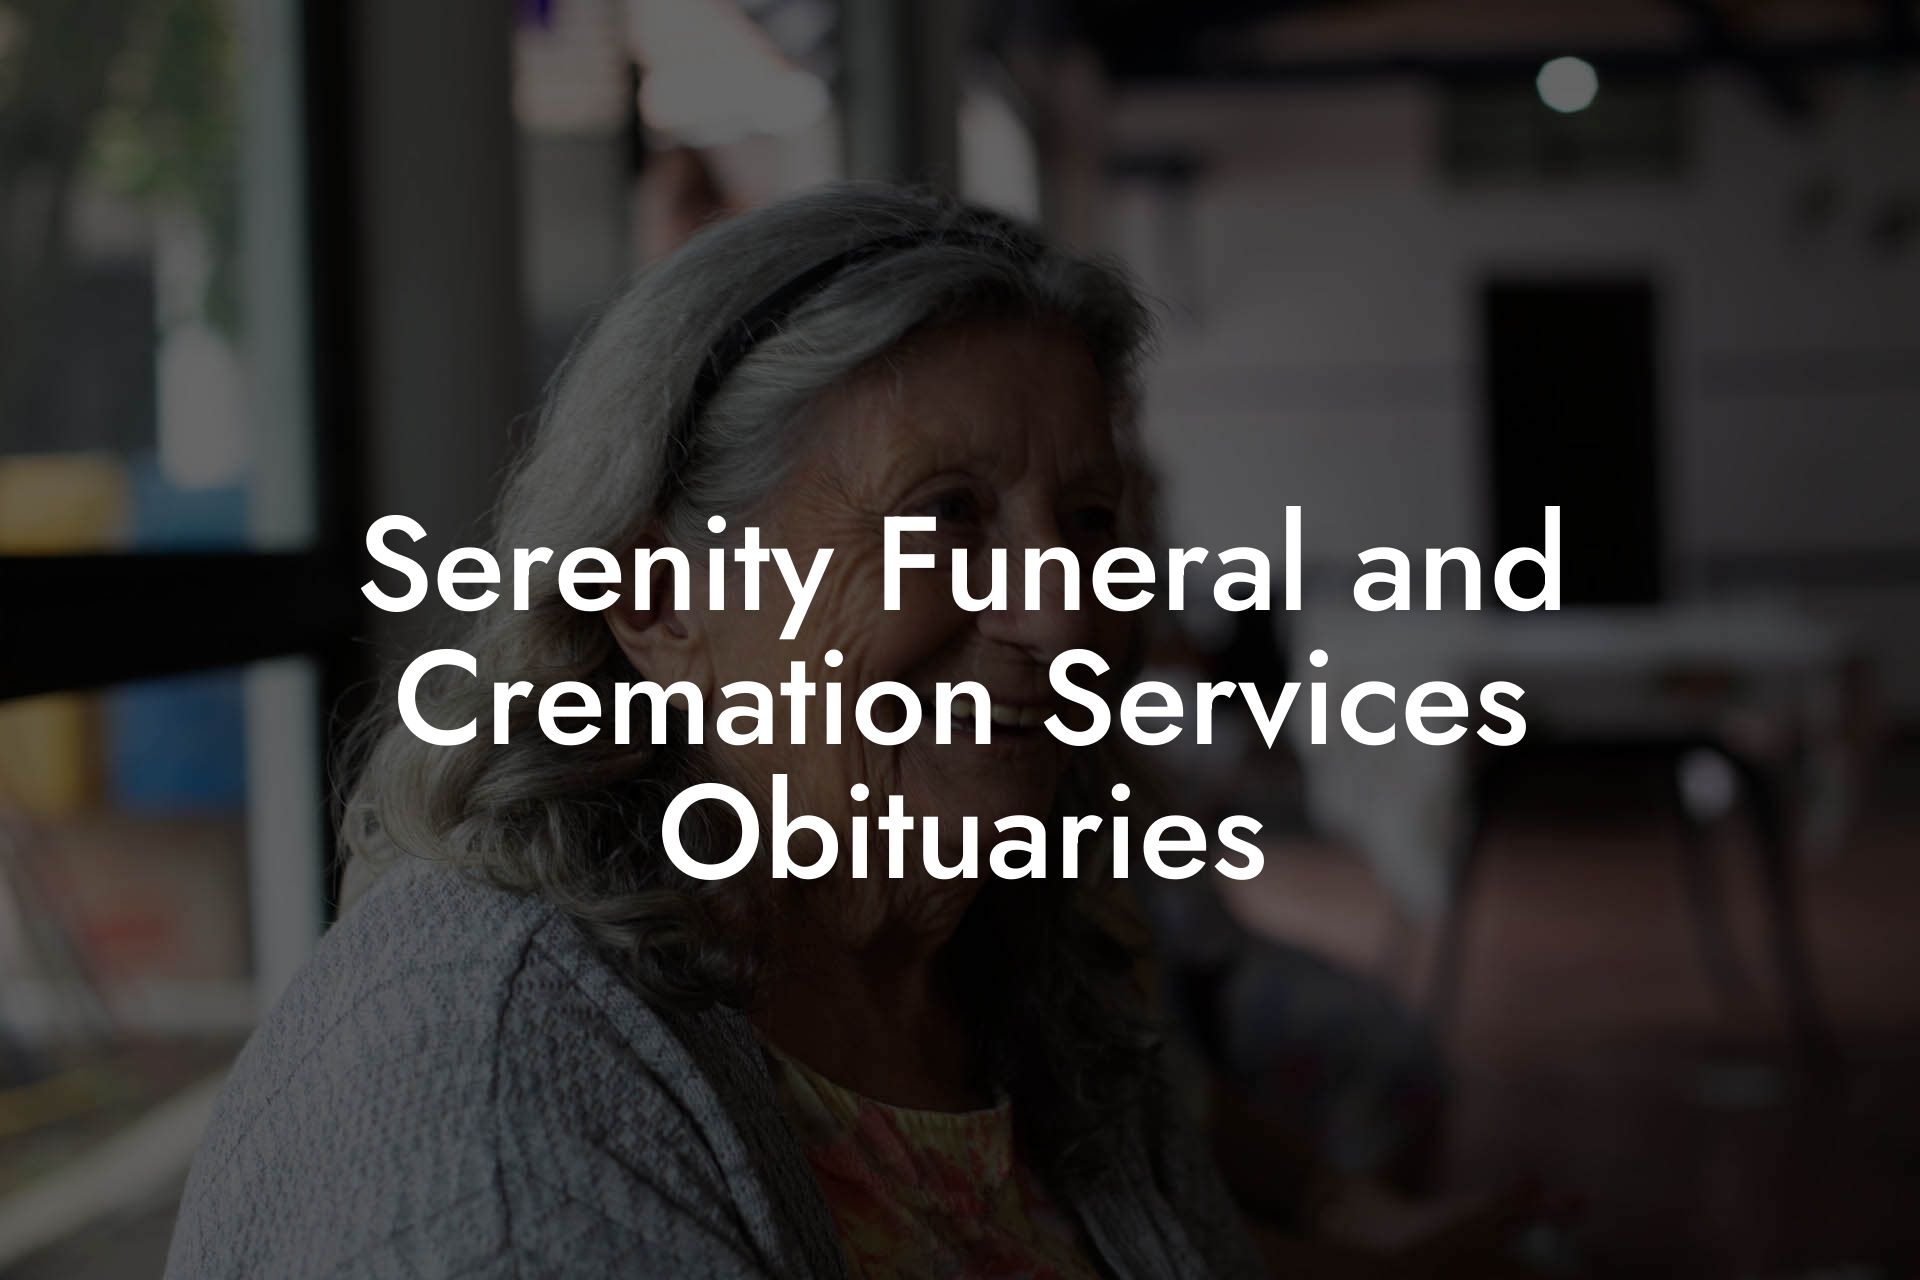 Serenity Funeral and Cremation Services Obituaries